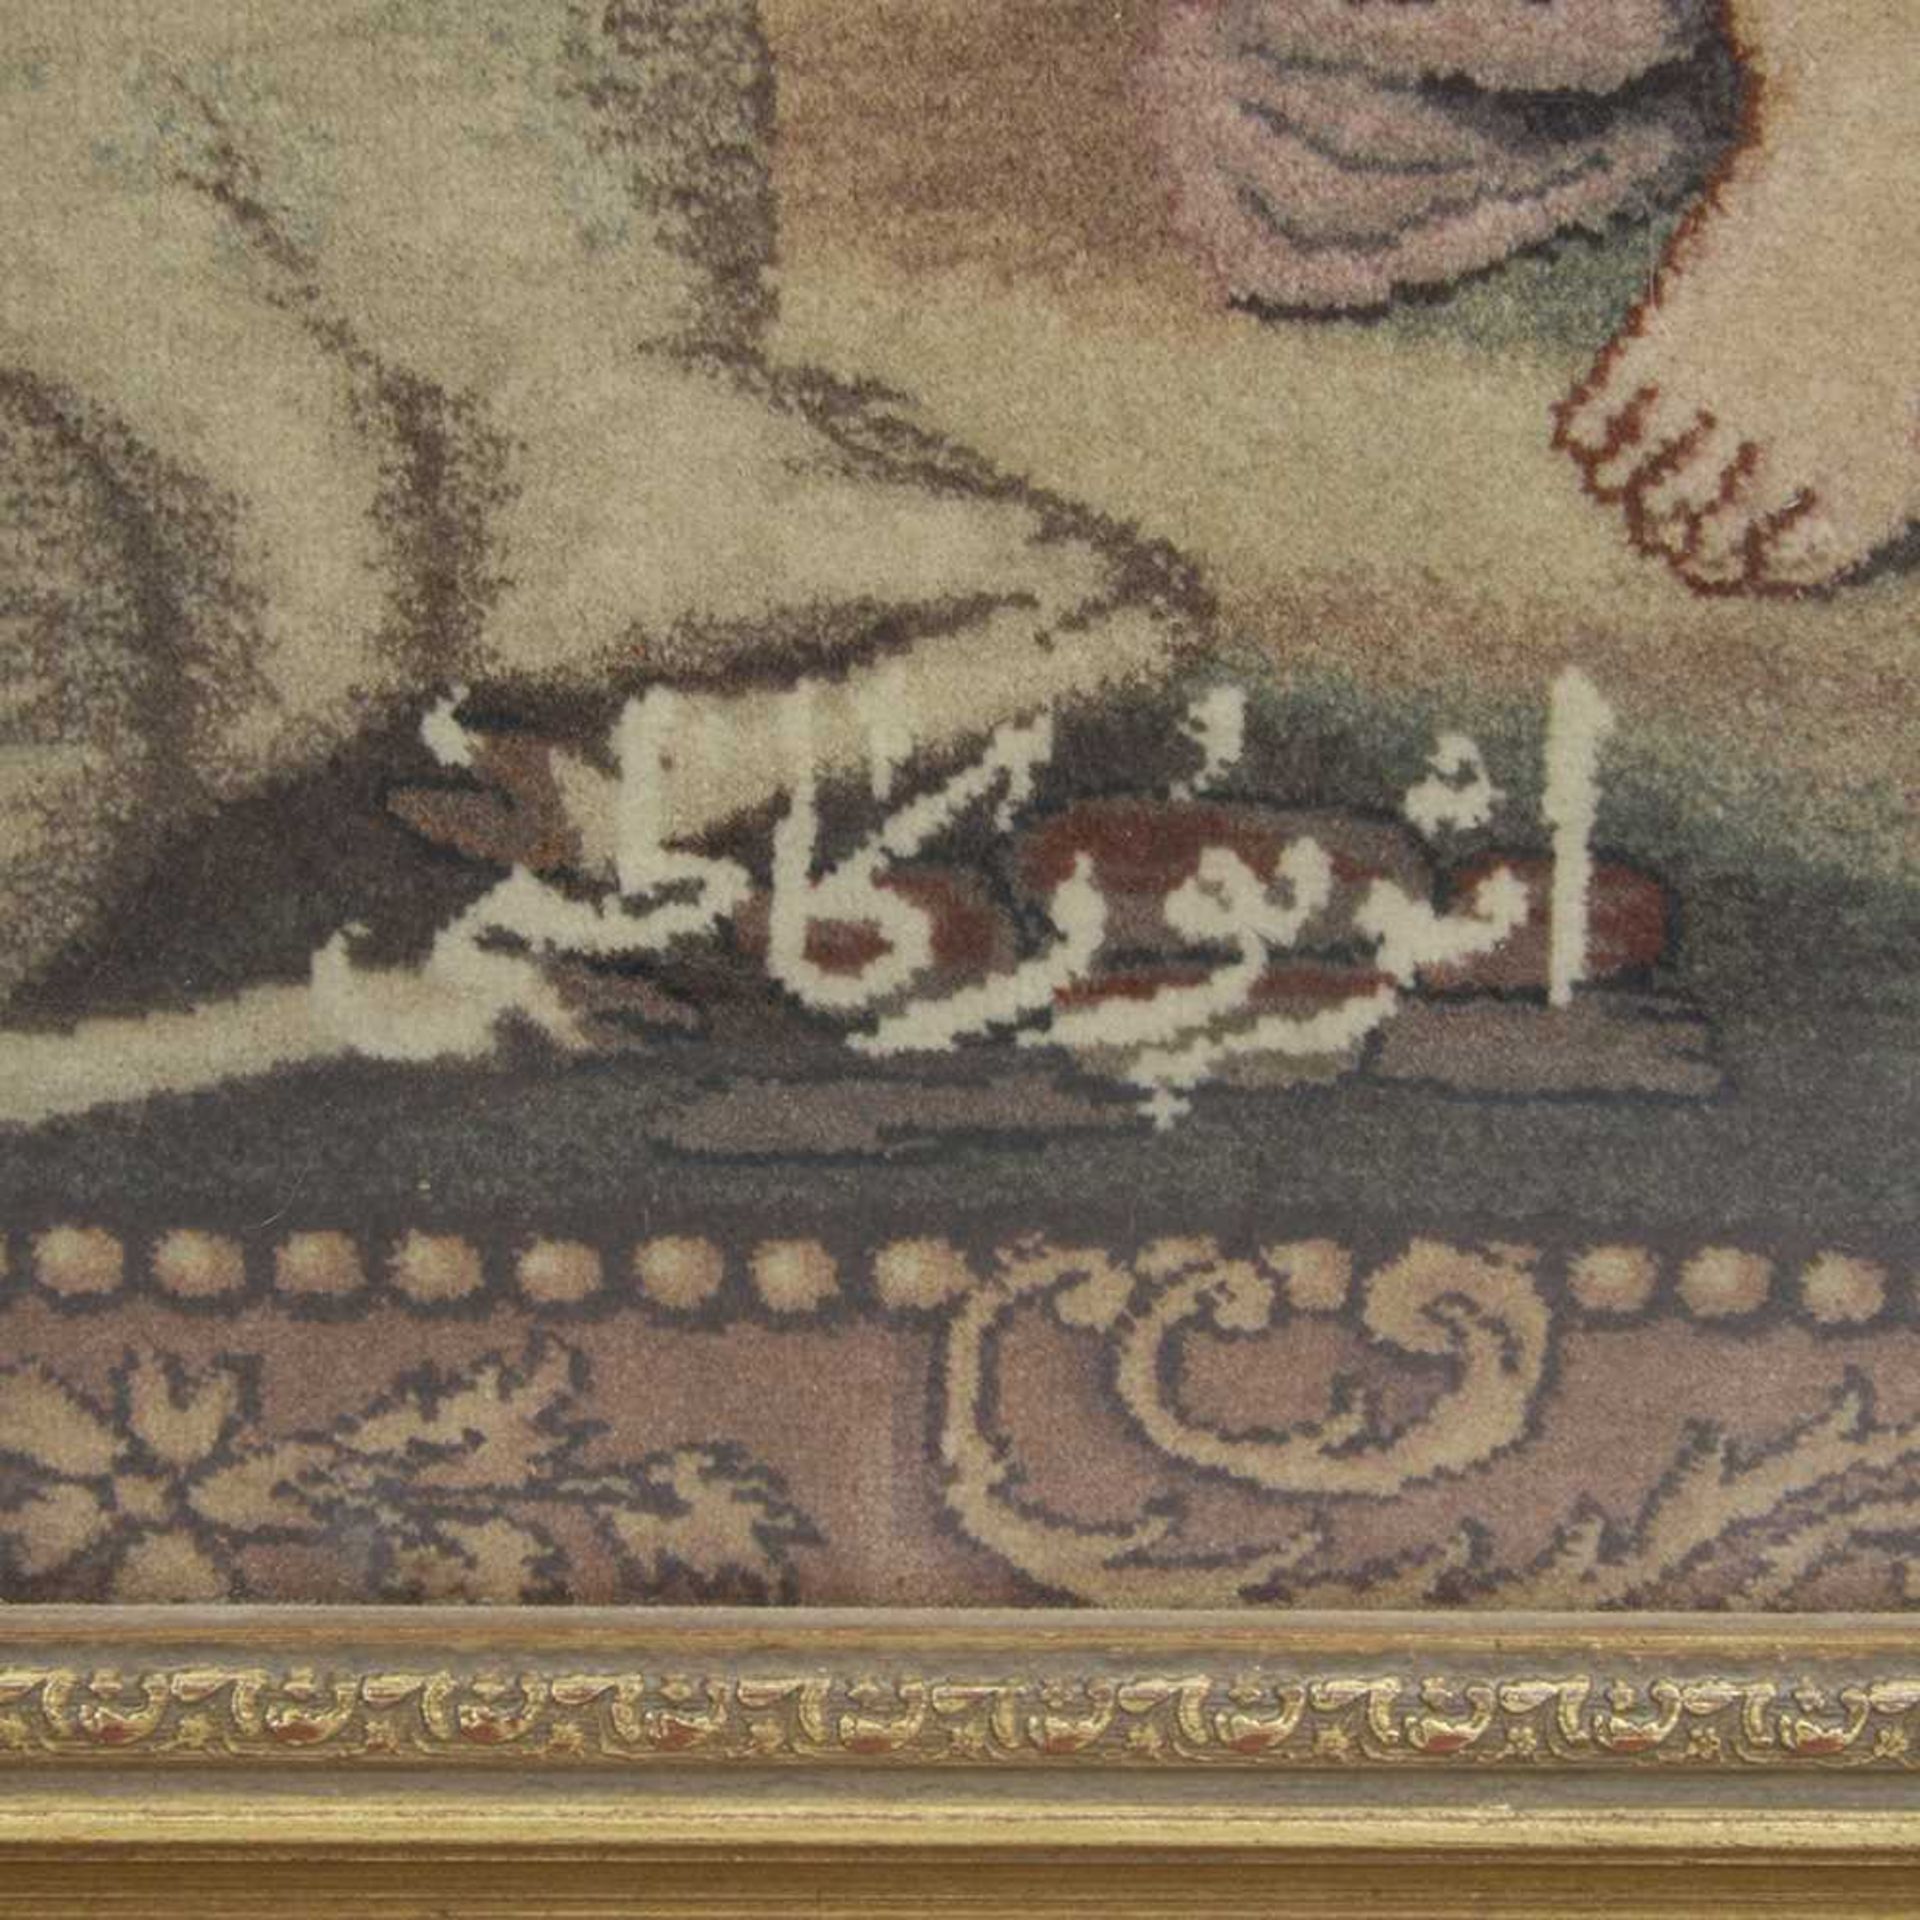 A PERSIAN CARPET WALL HANGING TWO SHEPHERD BOYS AND A LAMB - Image 2 of 2